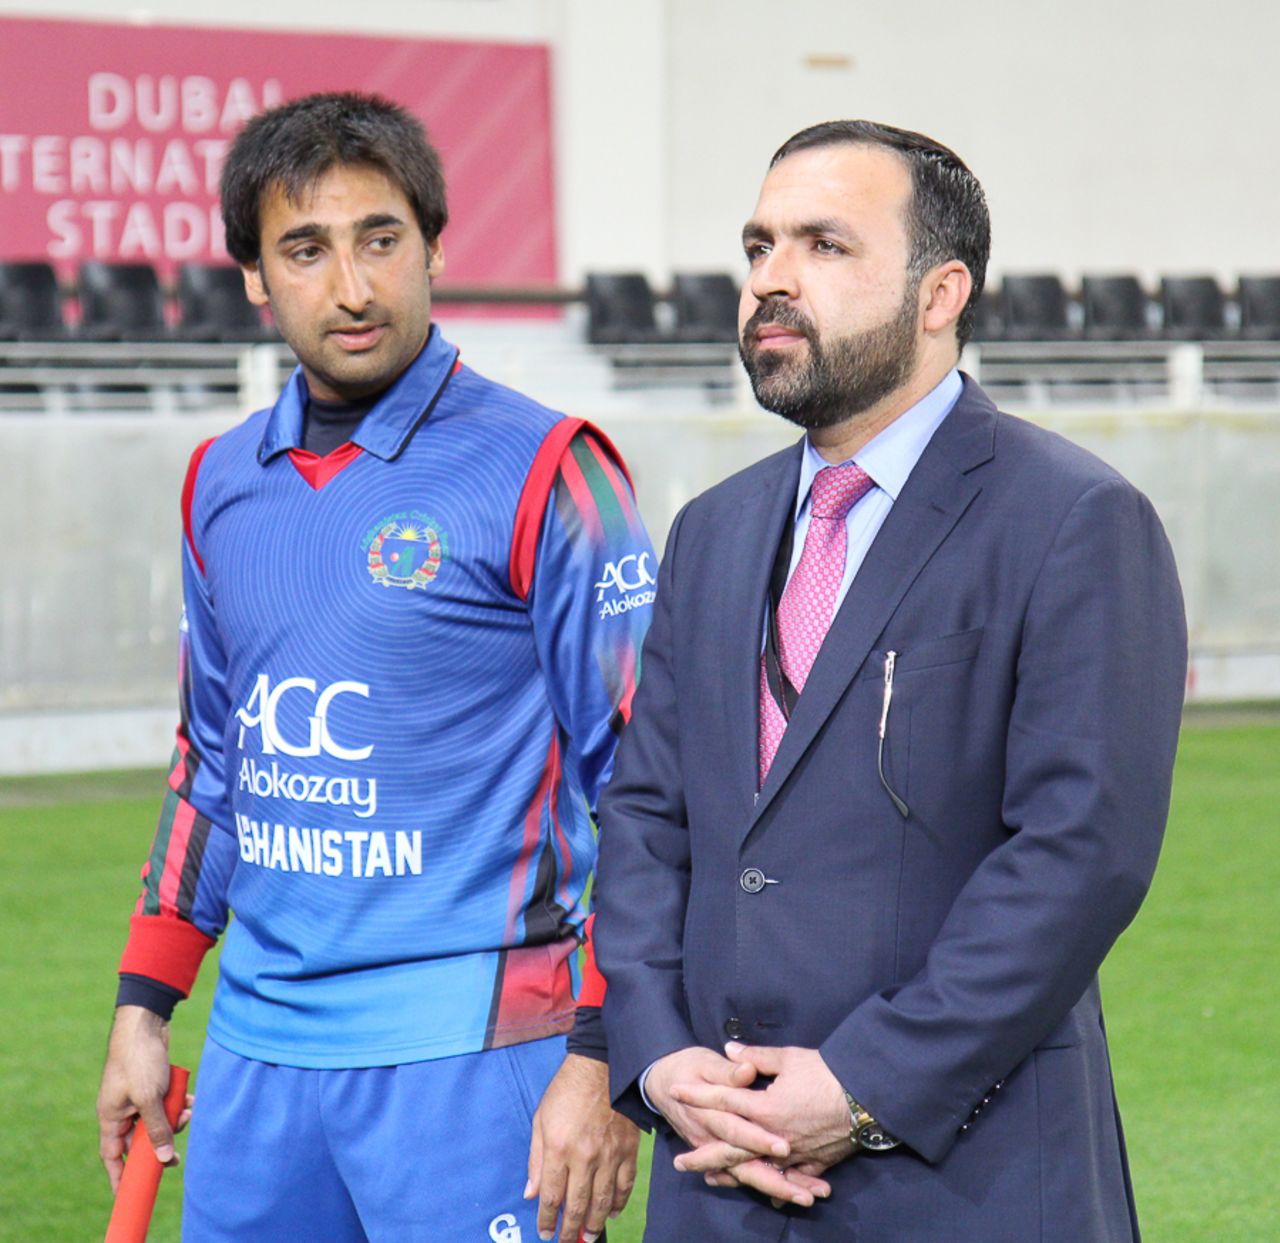 Afghanistan Cricket Board chairman Atif Mashal stands with captain Asghar Stanikzai ahead of the ceremony for Nawroz Mangal, Afghanistan v Ireland, Desert T20, Final, Dubai, January 20, 2017